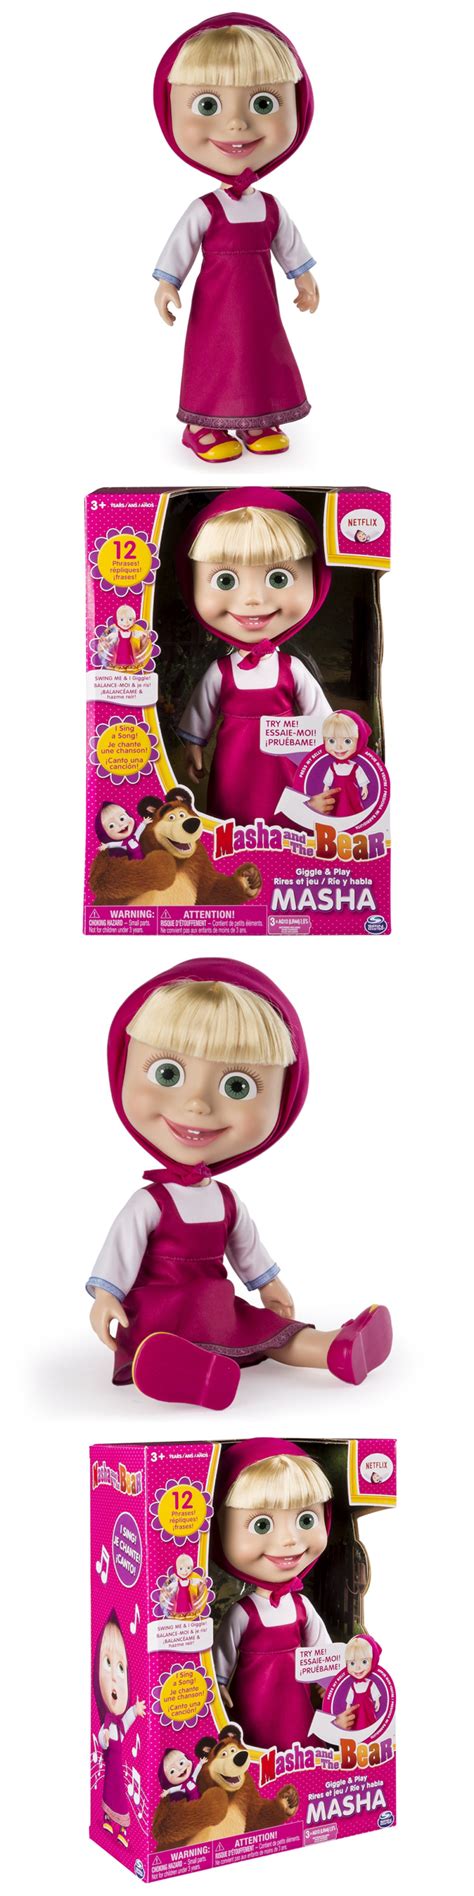 Dolls And Bears Masha And The Bear 12” Giggle And Play Masha Interactive Doll Buy It Now